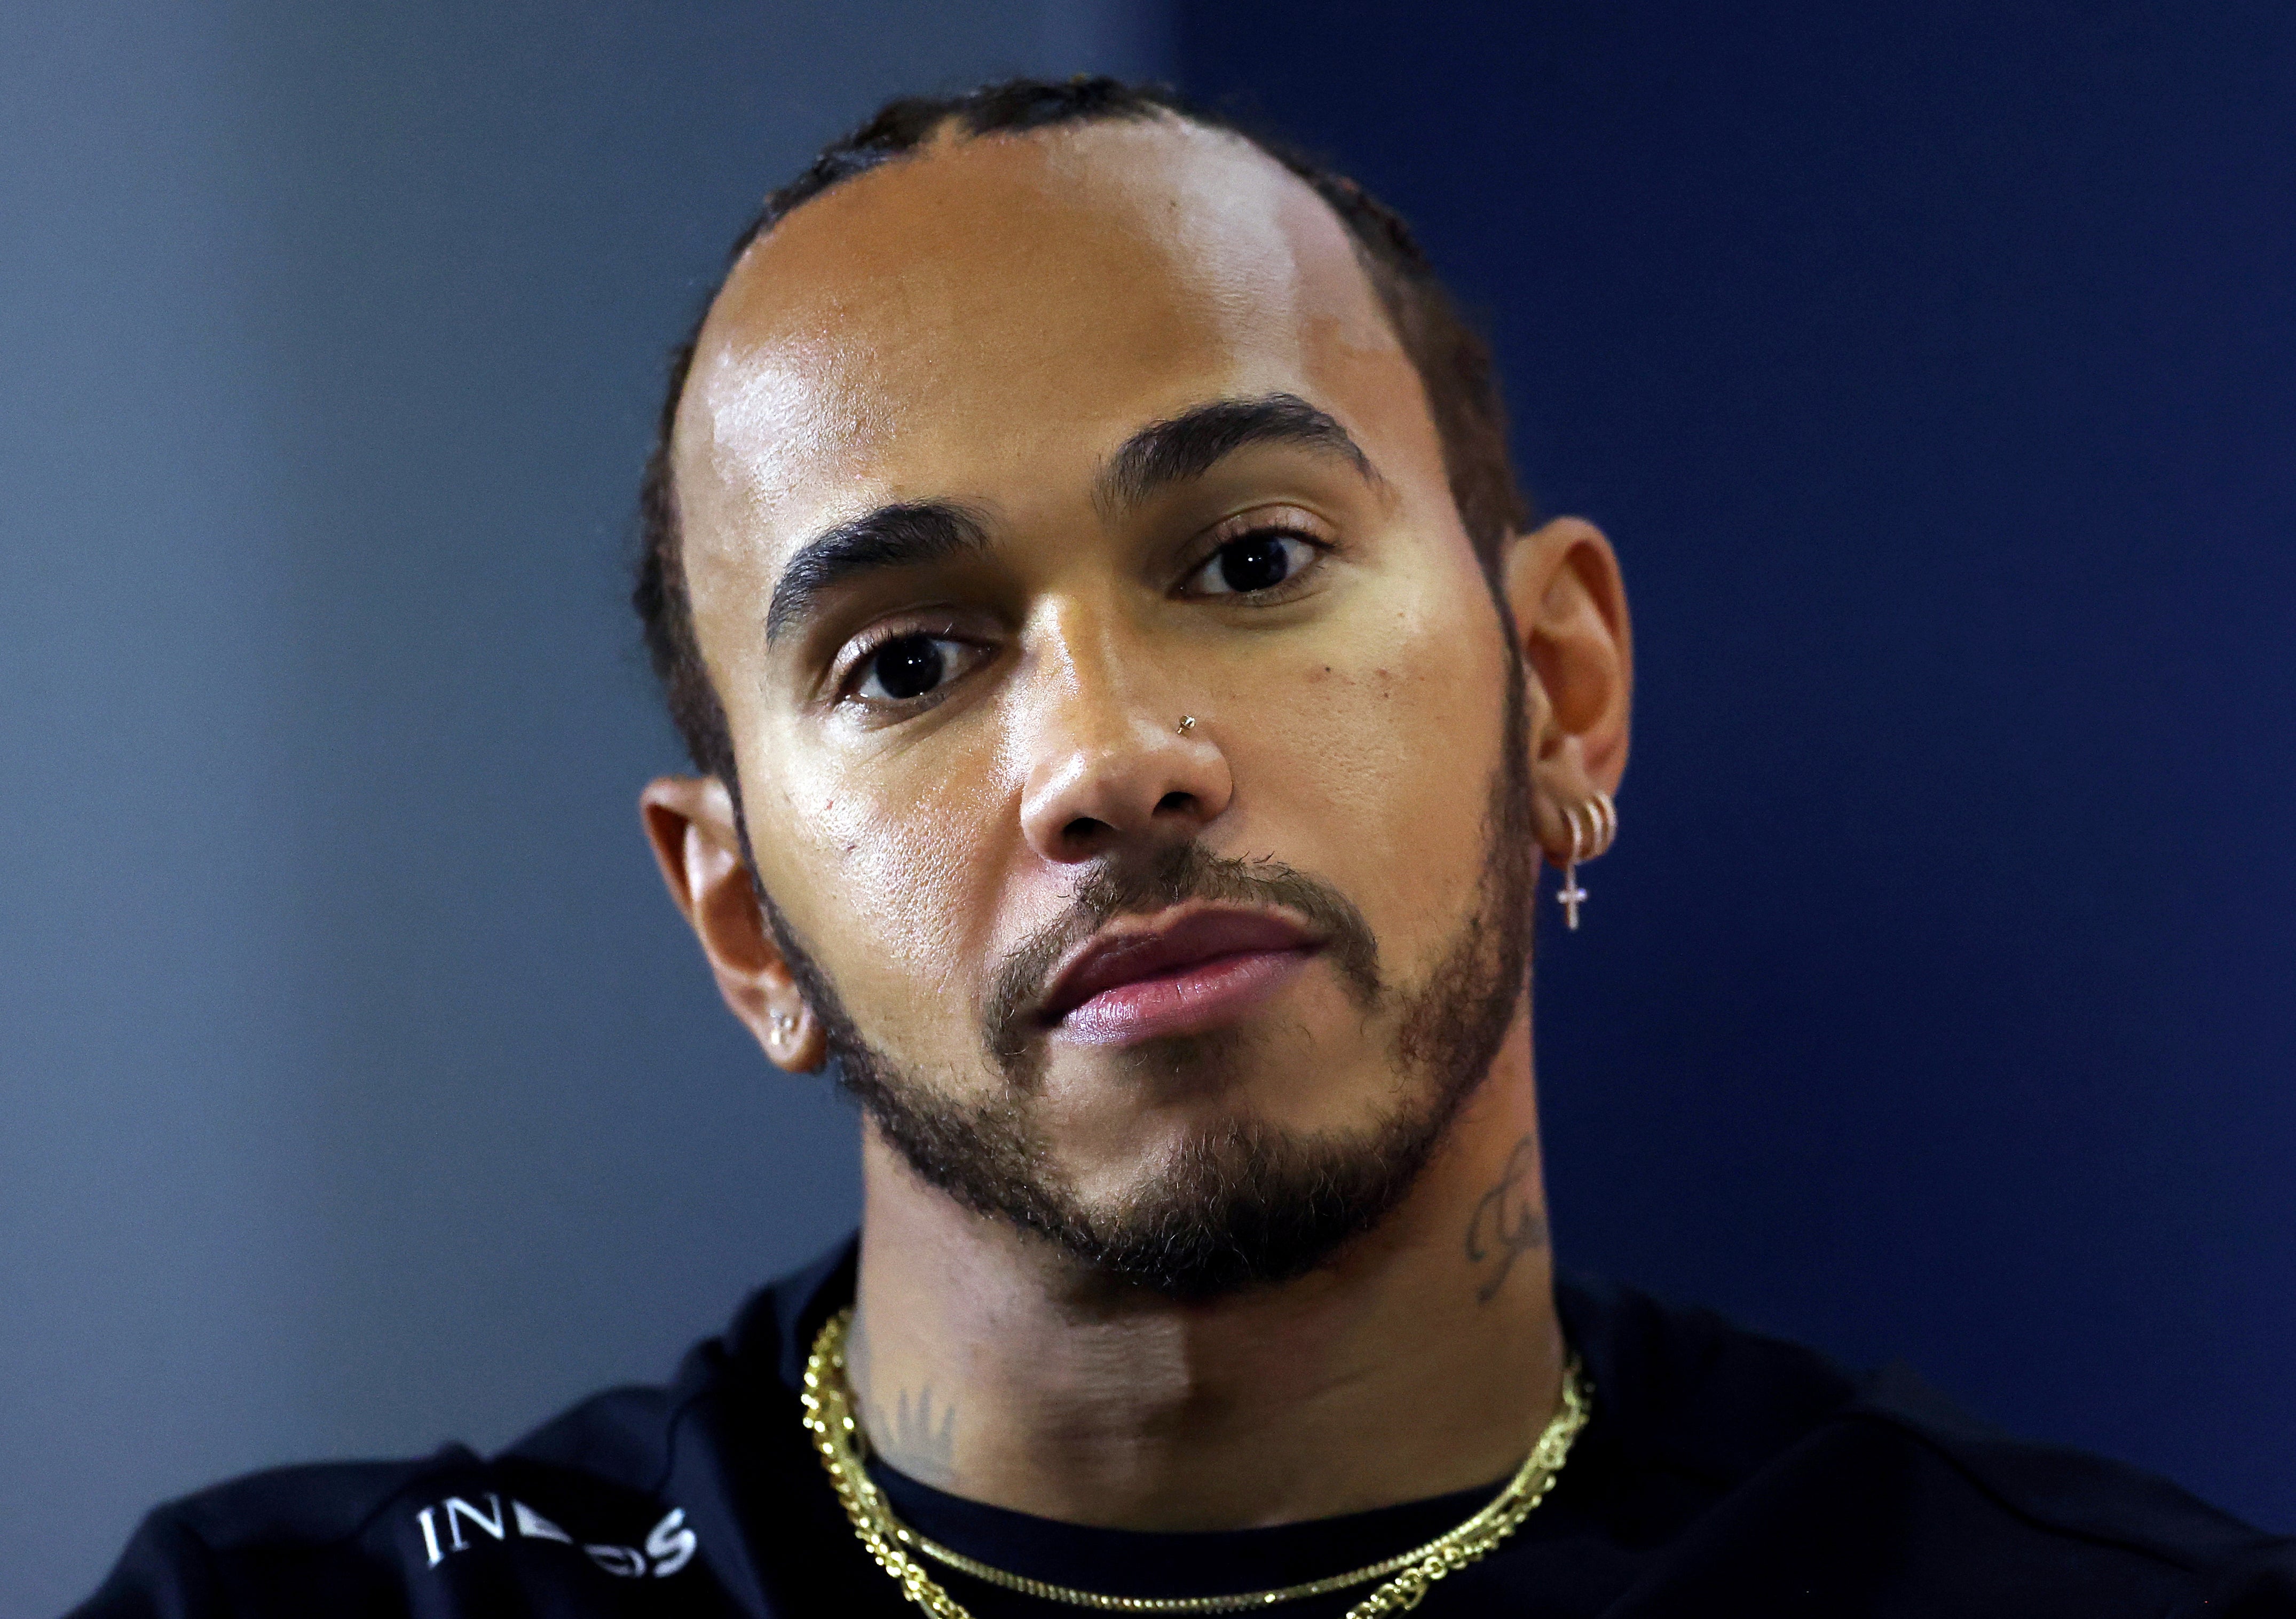 Sir Lewis Hamilton said the sponsorship deal had ‘nothing’ to do with him (PA)